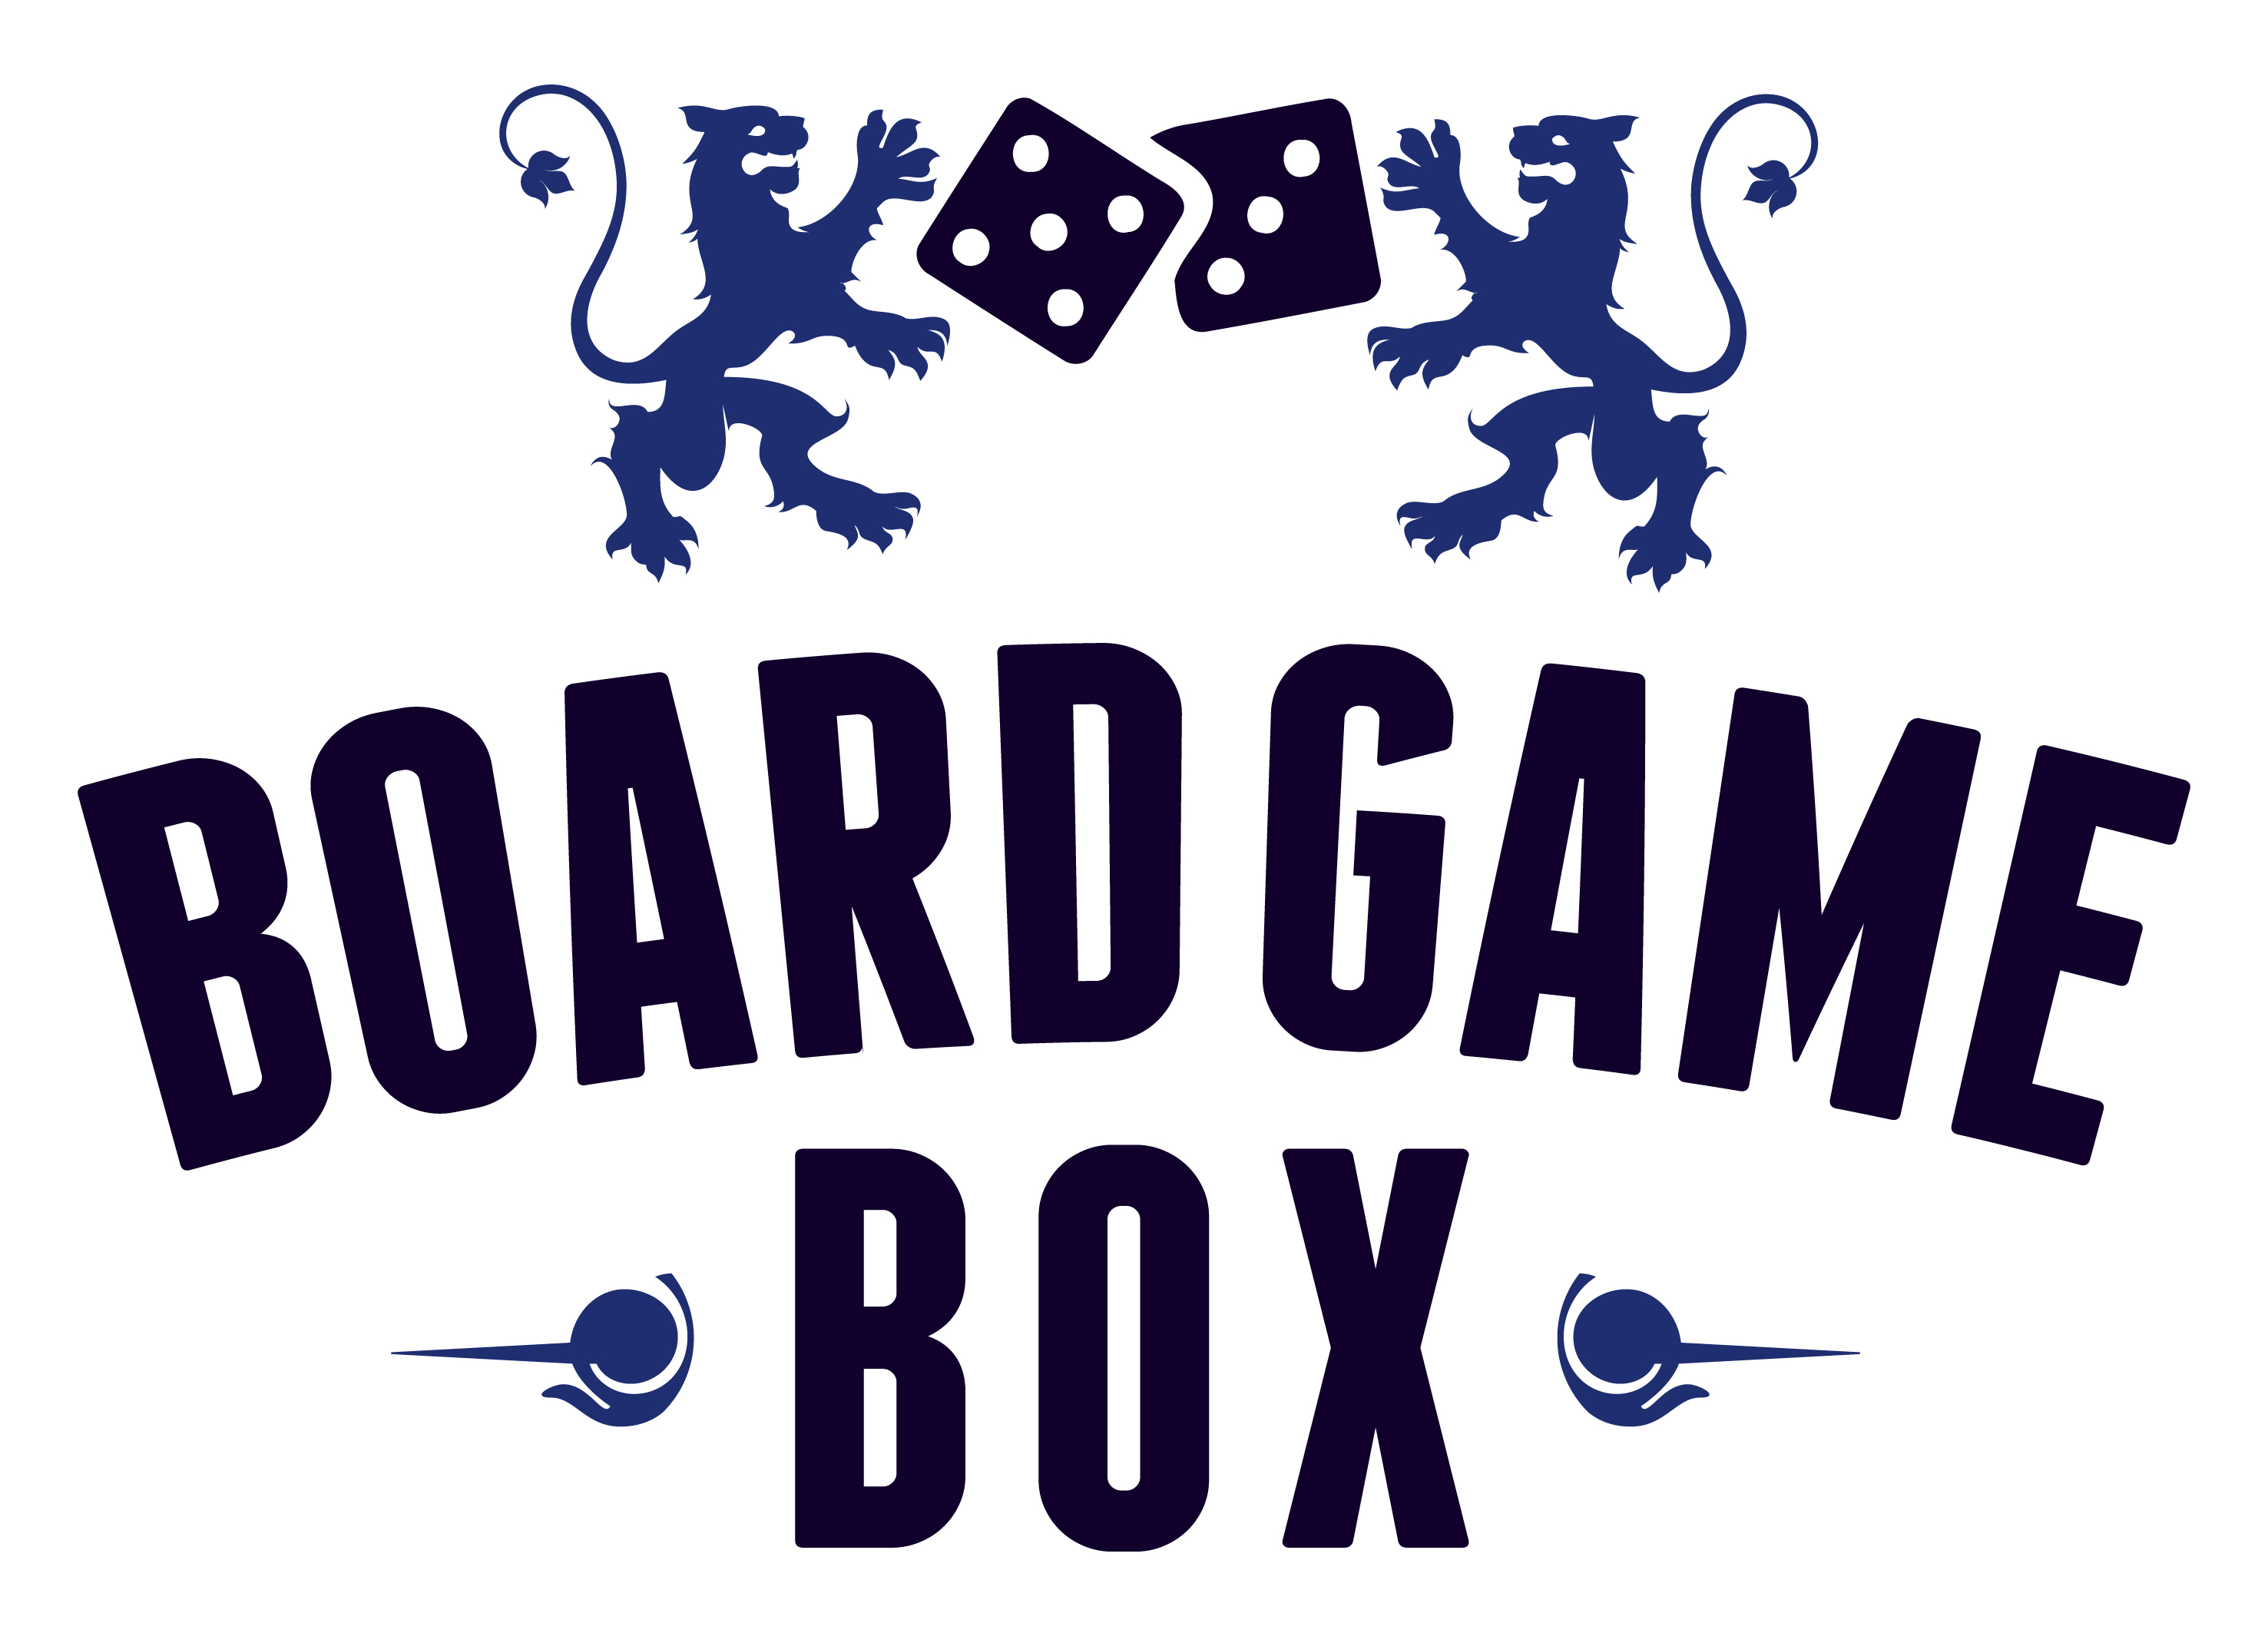 BOARD GAME BOX Halle 3 Stand A13